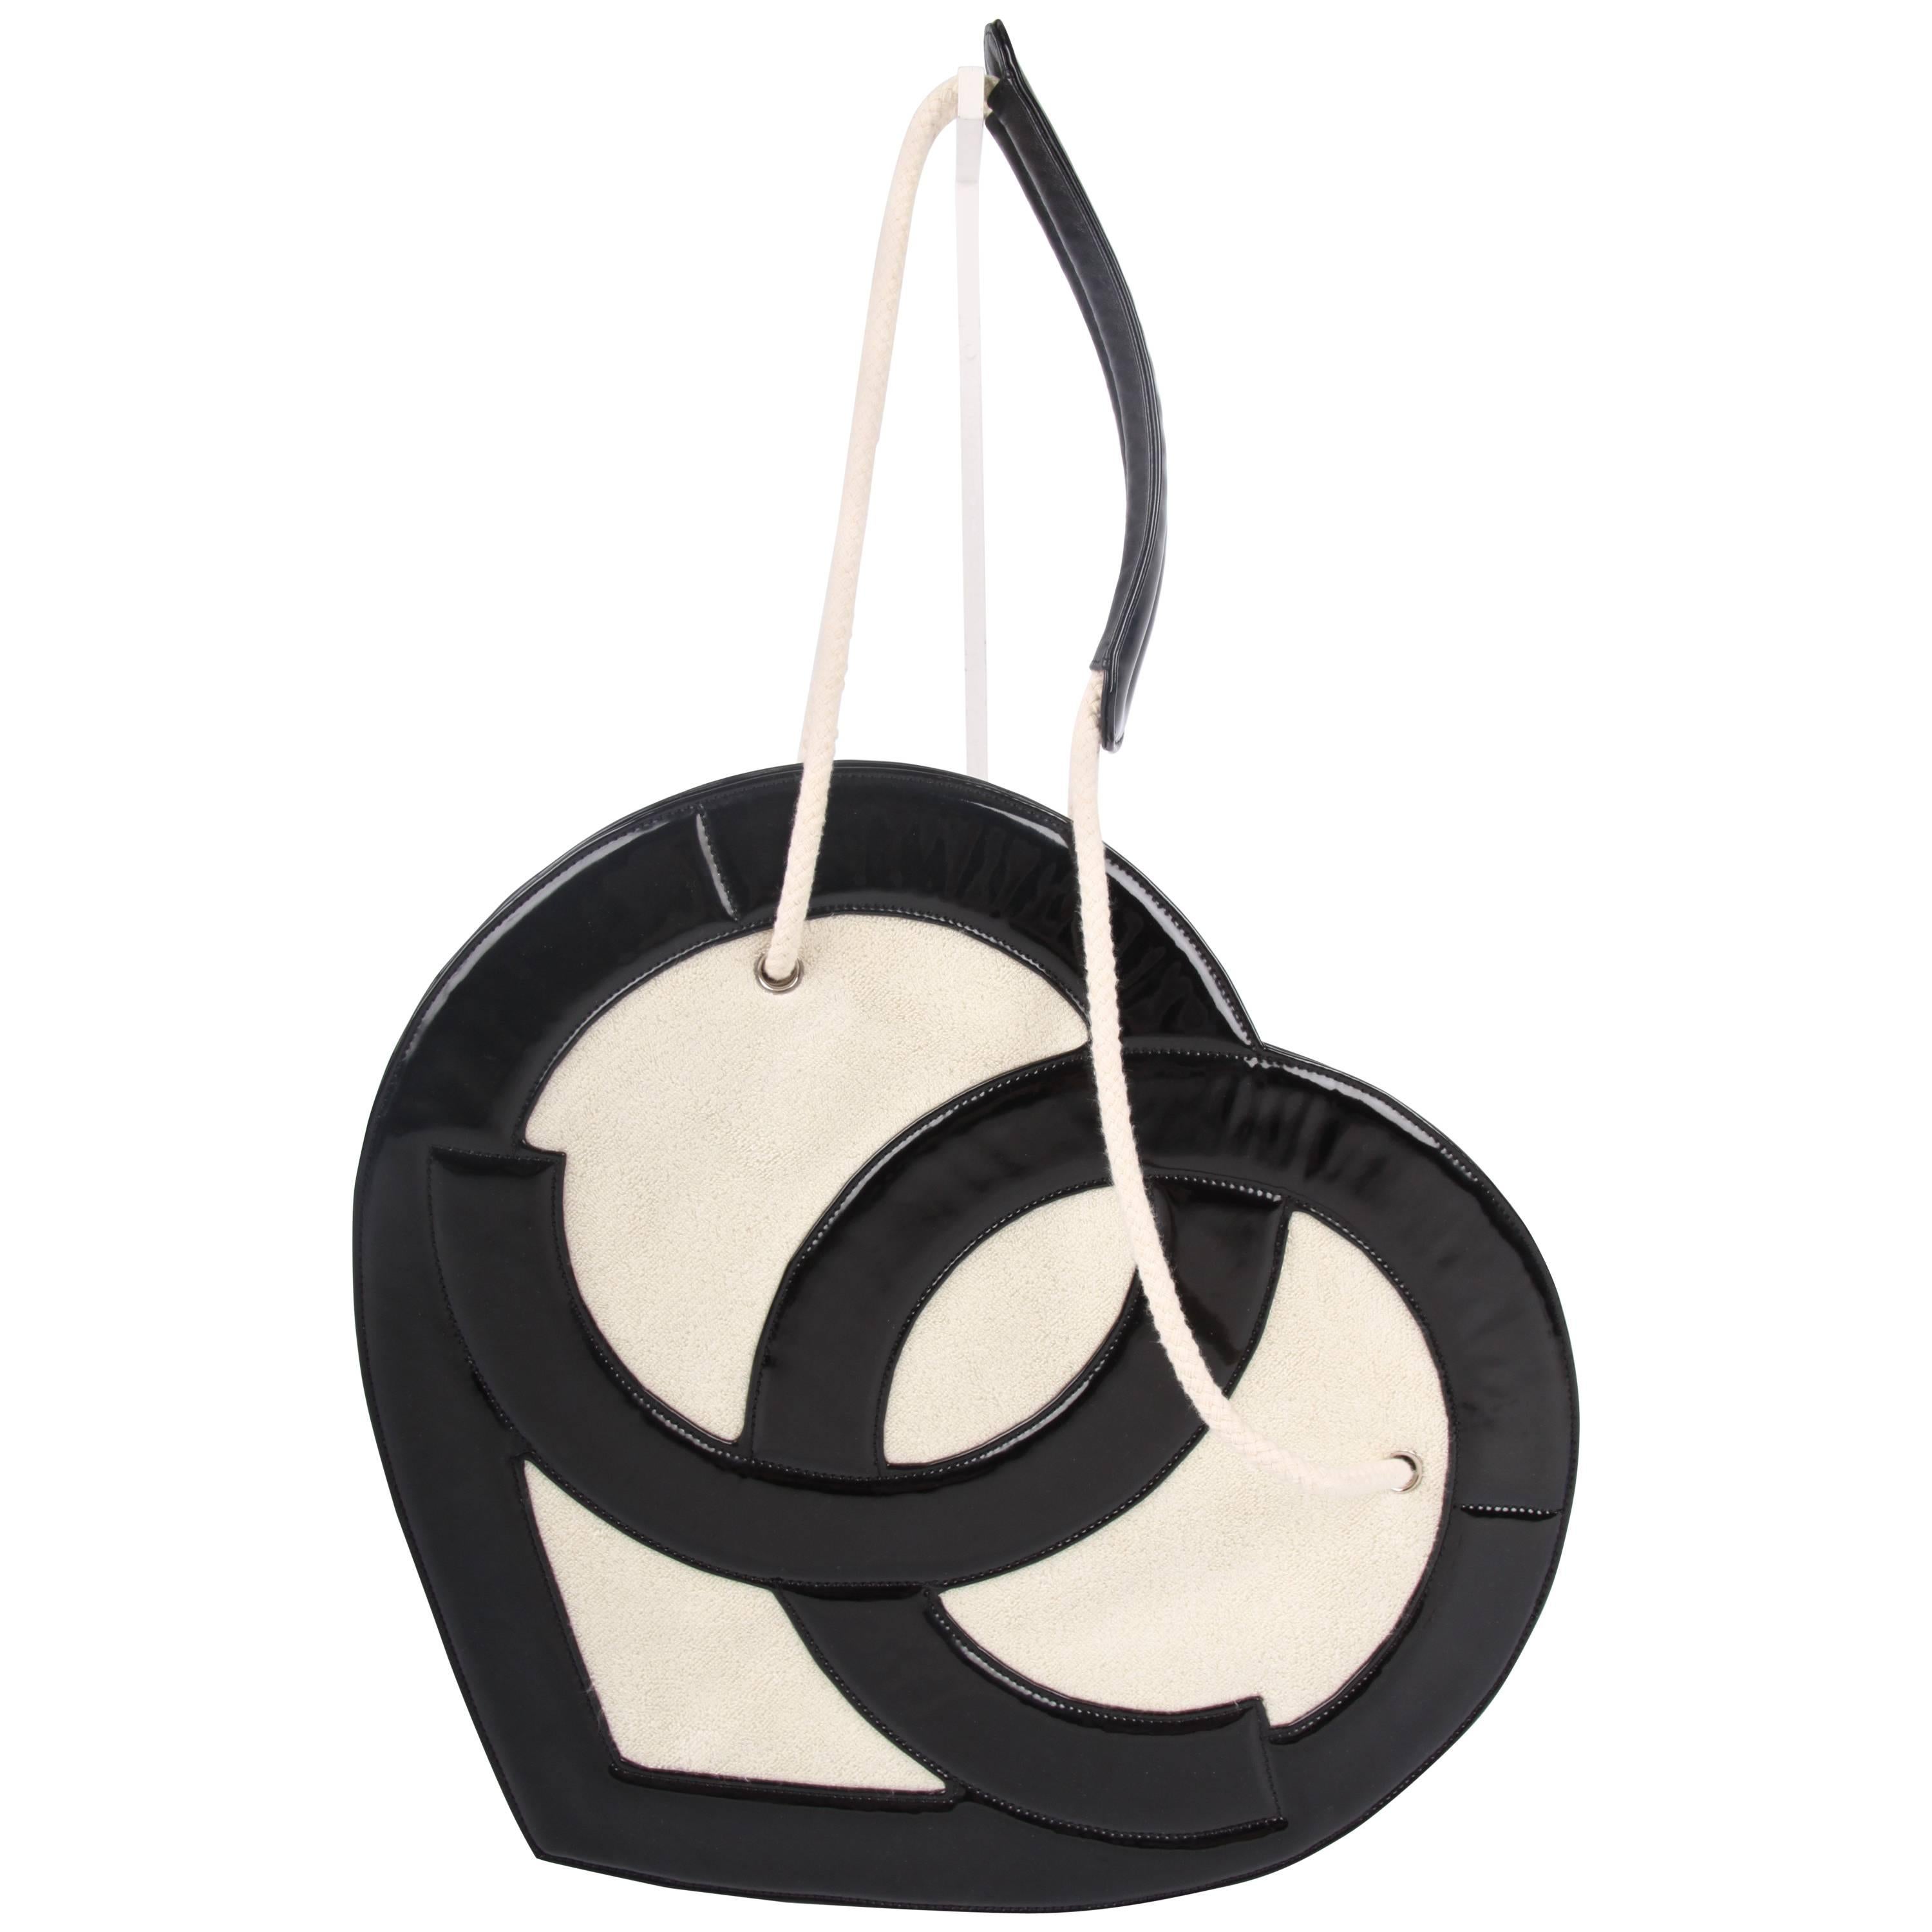 Chanel Heart Shape Bag Patent Leather Terry Cloth 2009 - black & white